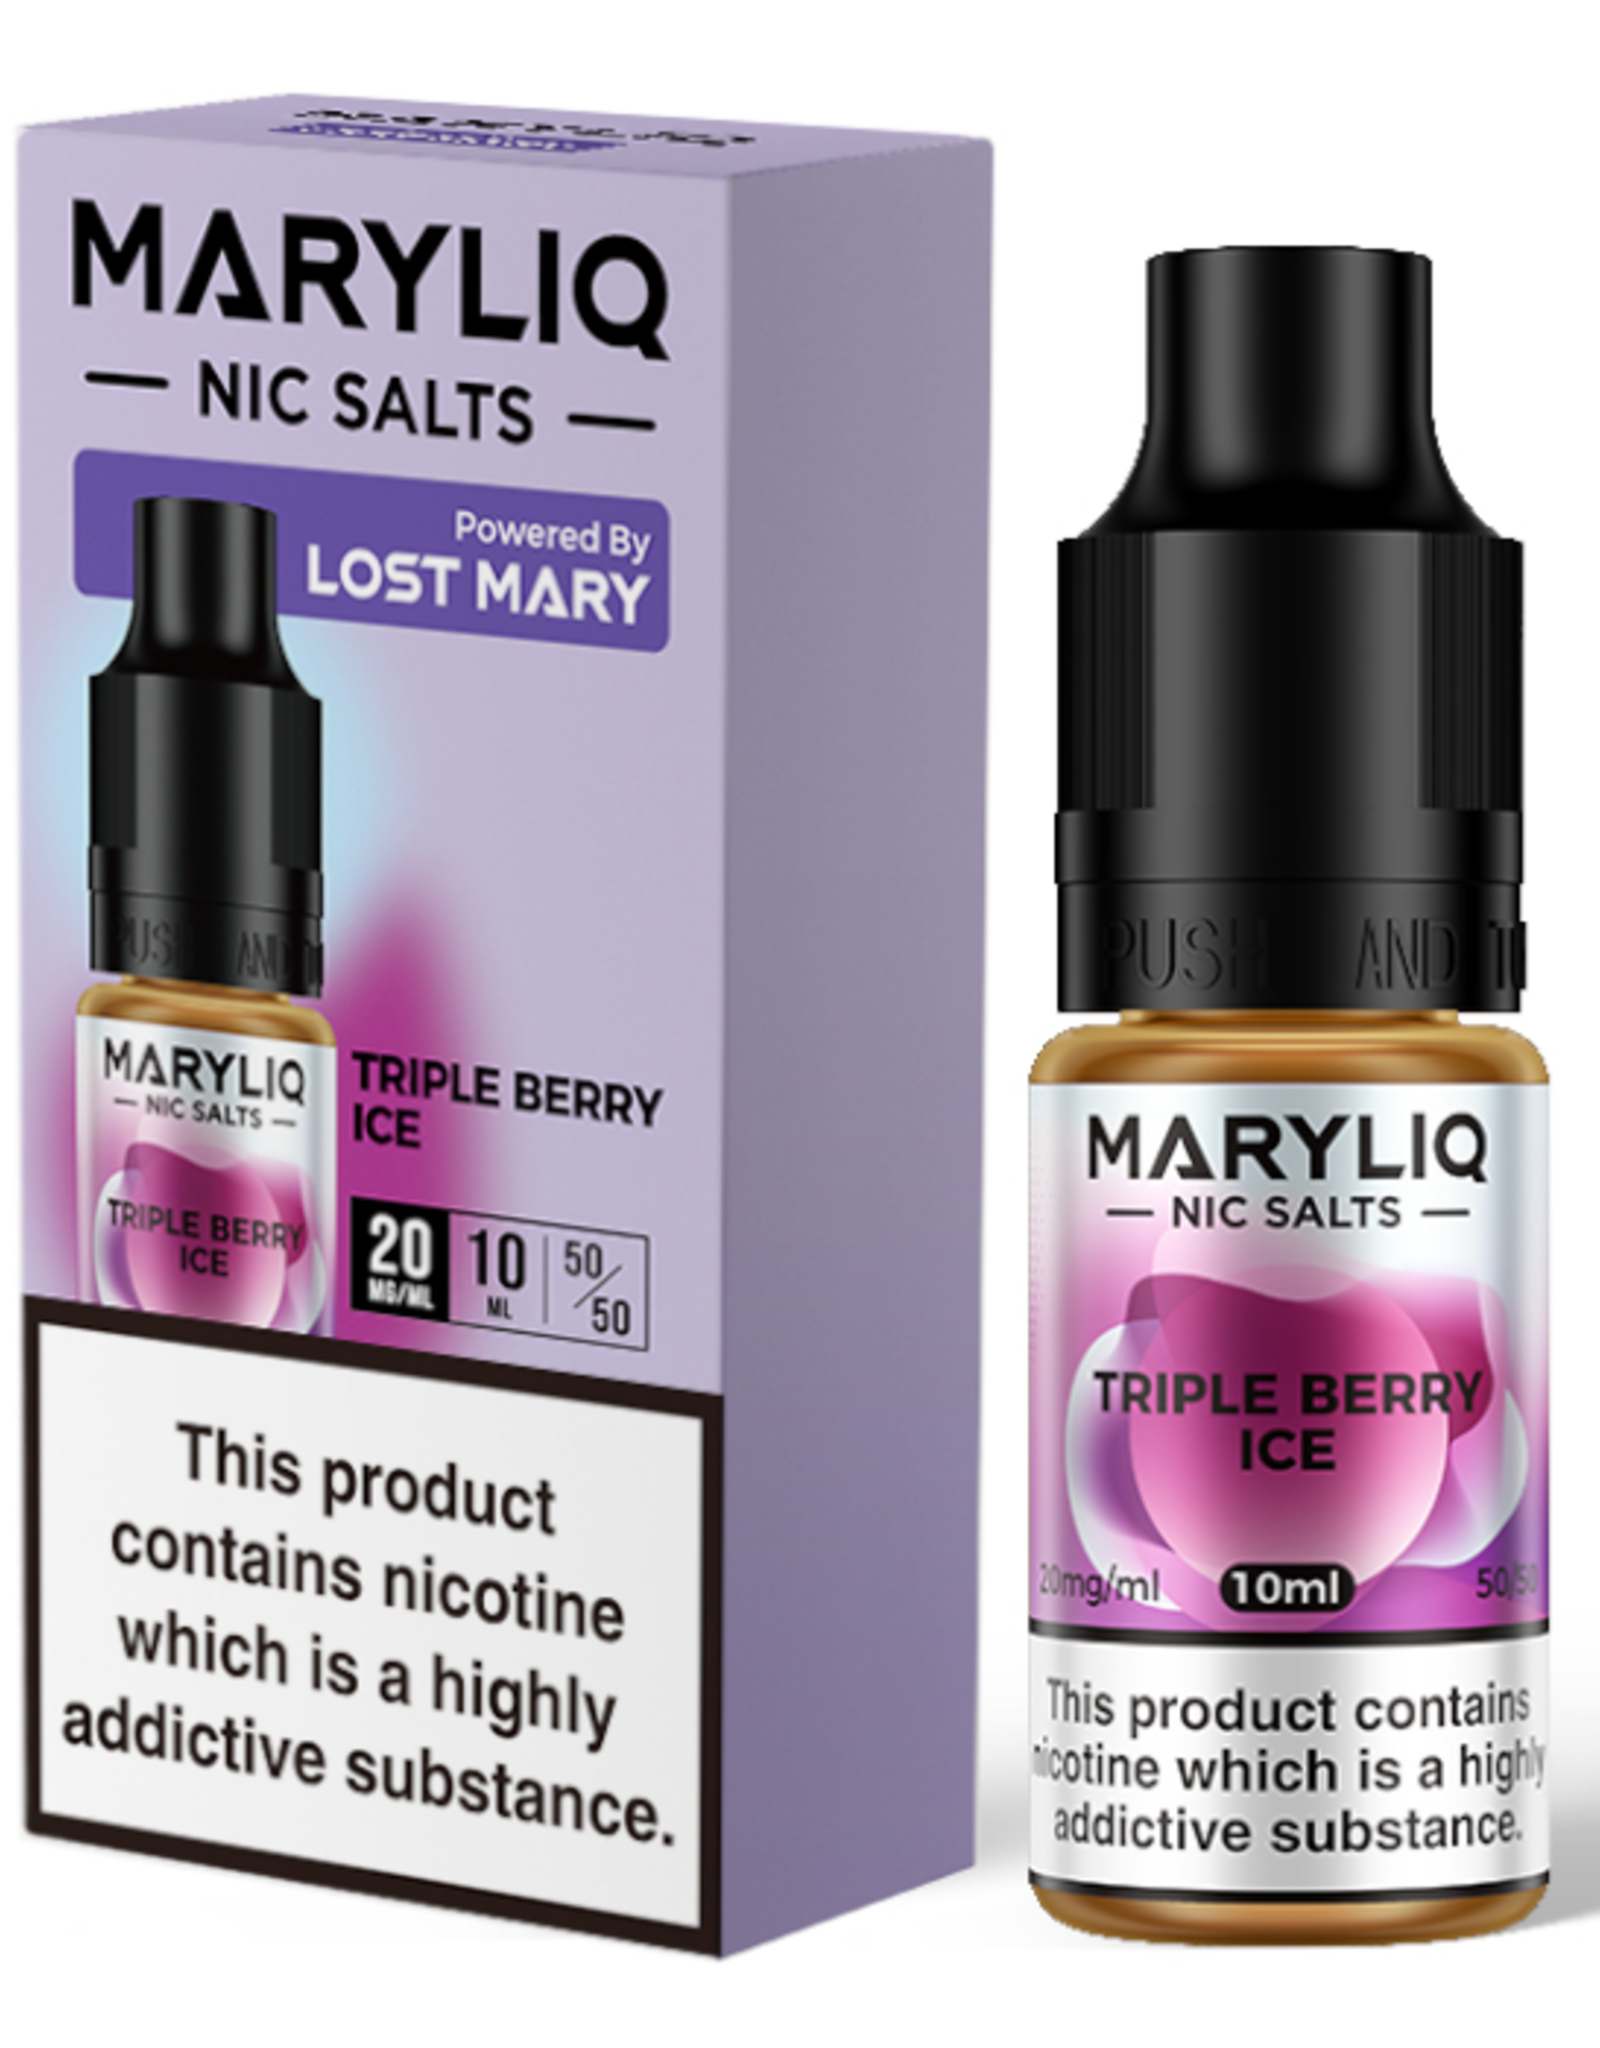 Lost Mary Lost Mary MARYLIQ Nic Salts - Triple Berry Ice - 10ml